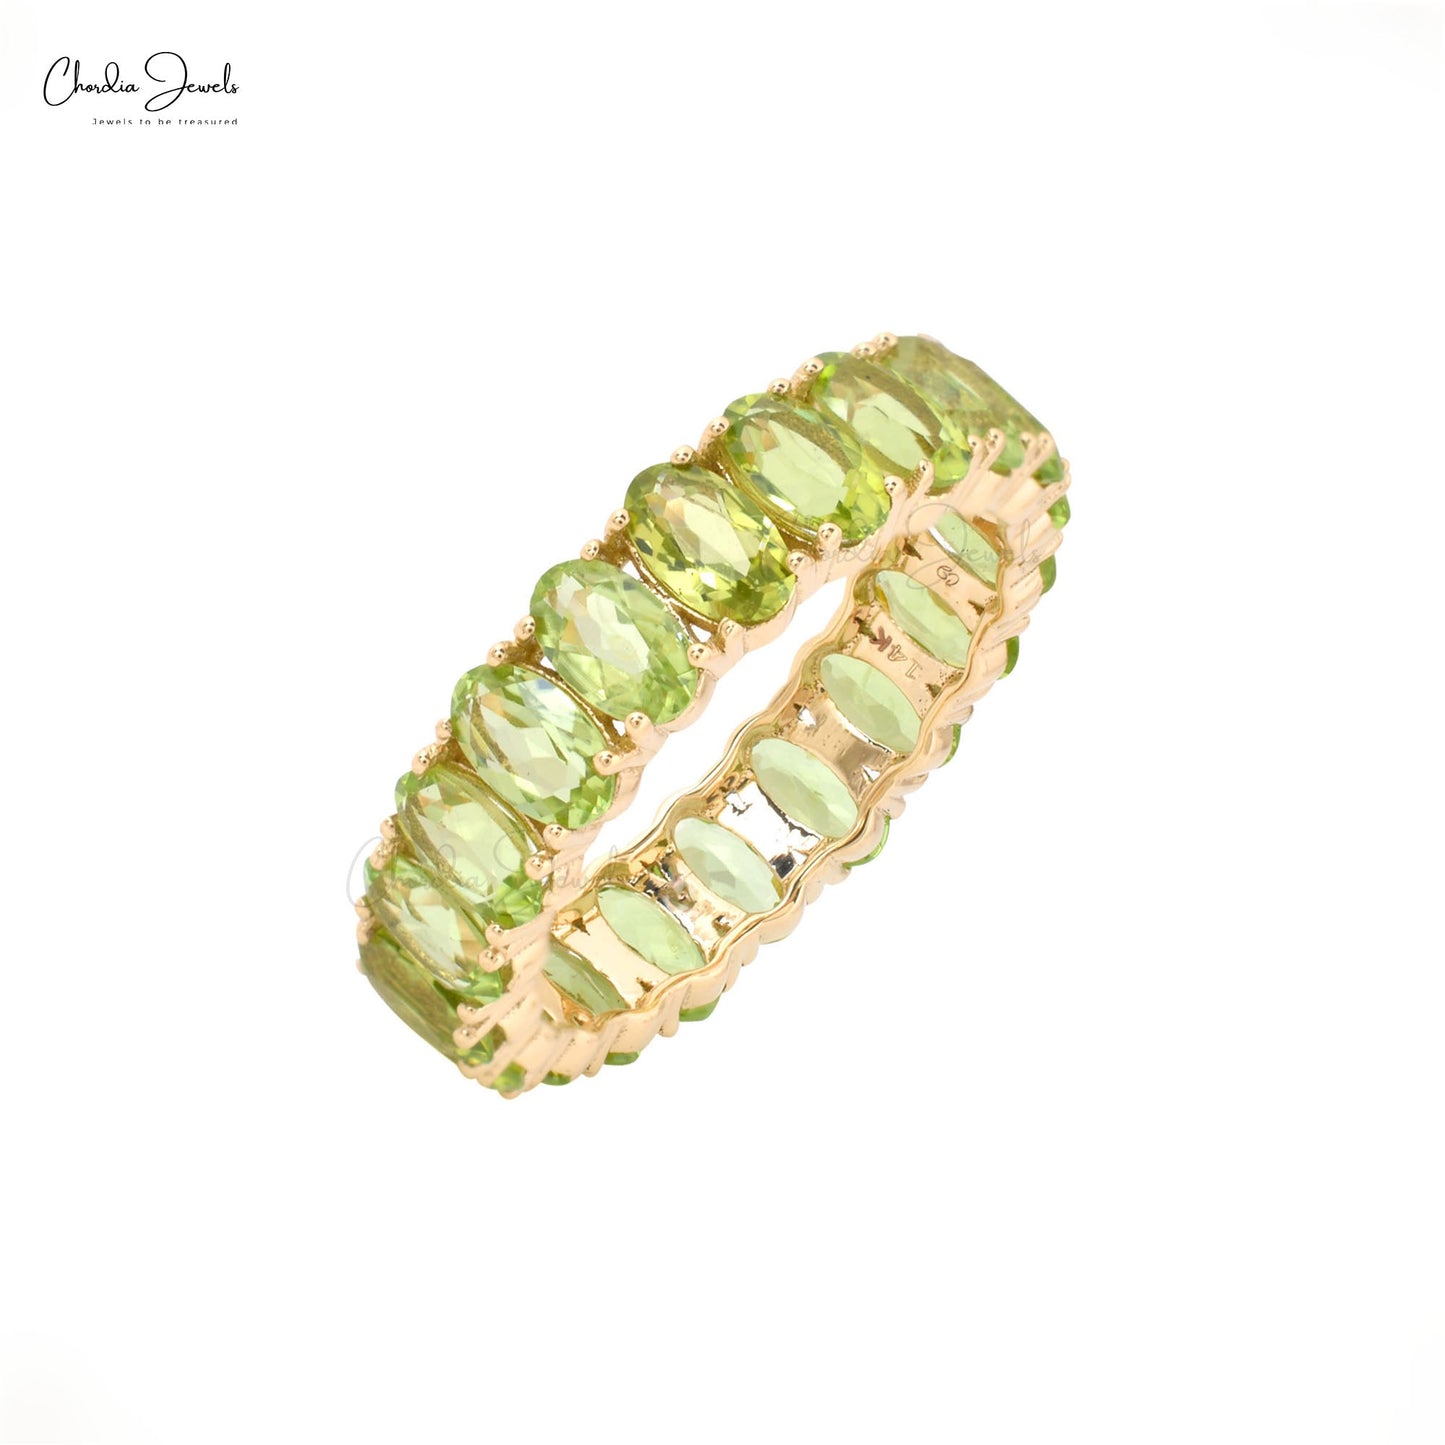 Natural Peridot Ring, 14k Solid Yellow Gold Peridot Band, August Birthstone Eternity Band Ring, 5 Carat Natural Gemstone Wedding Ring, 5x3mm Oval Cut Anniversary Ring For Her